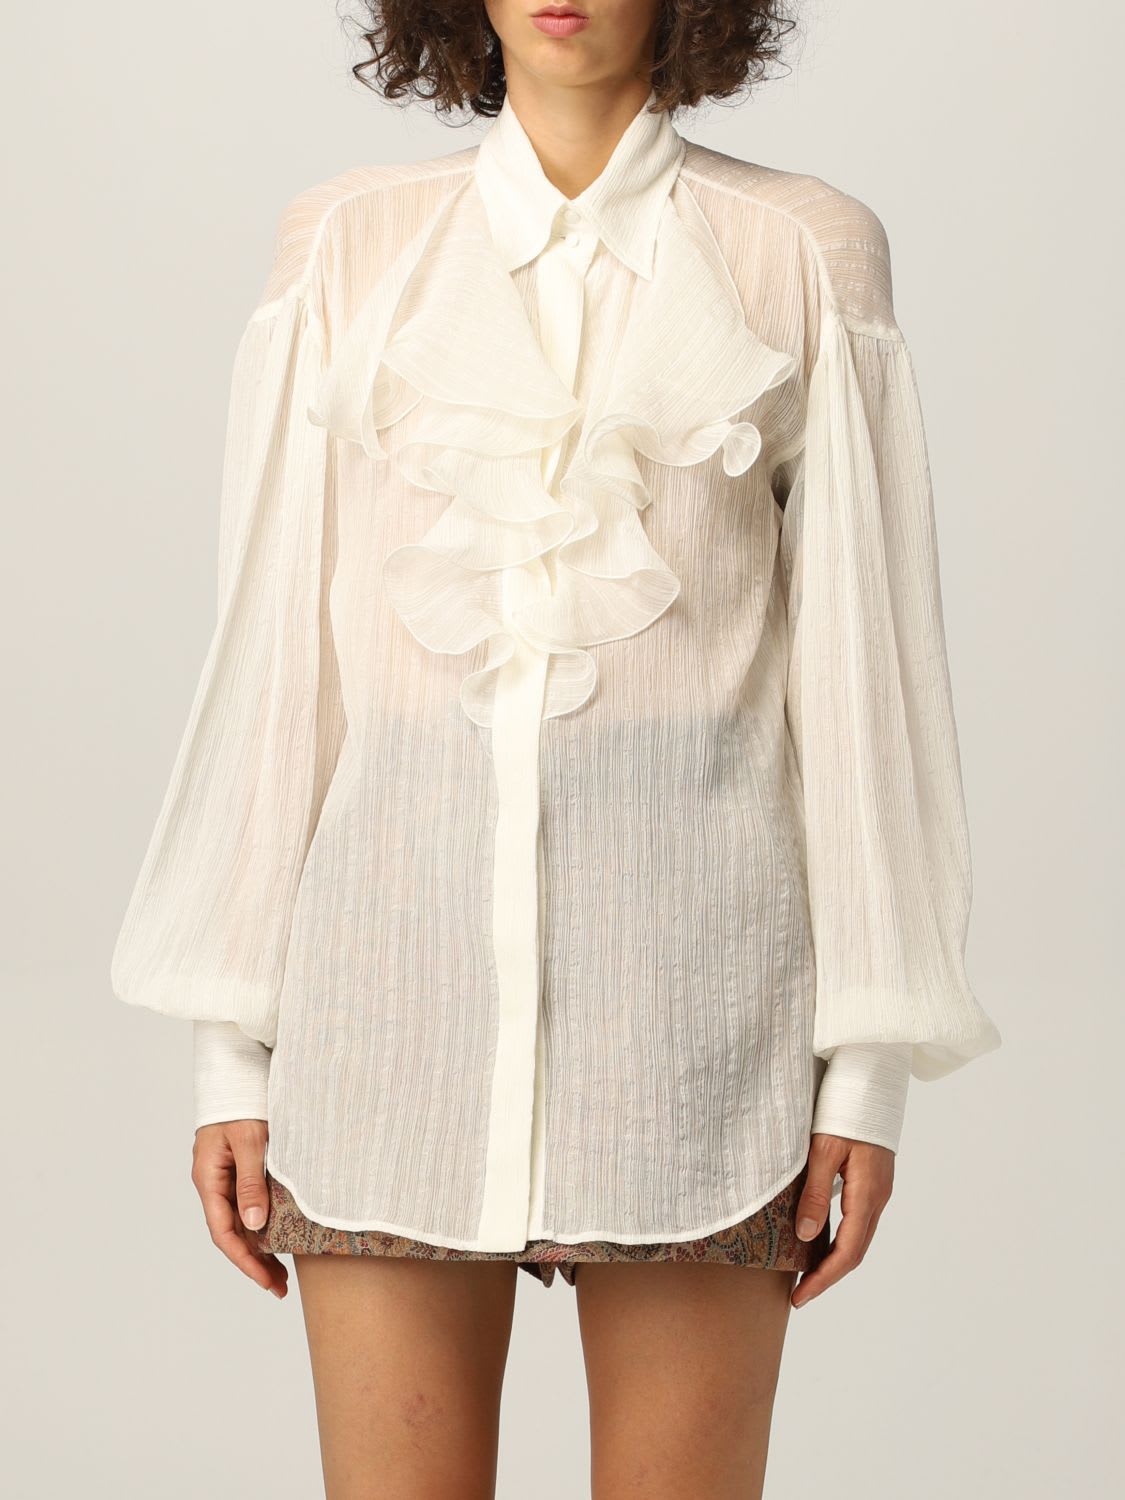 Etro Shirt Etro Shirt In Cotton And Silk With Ruffles